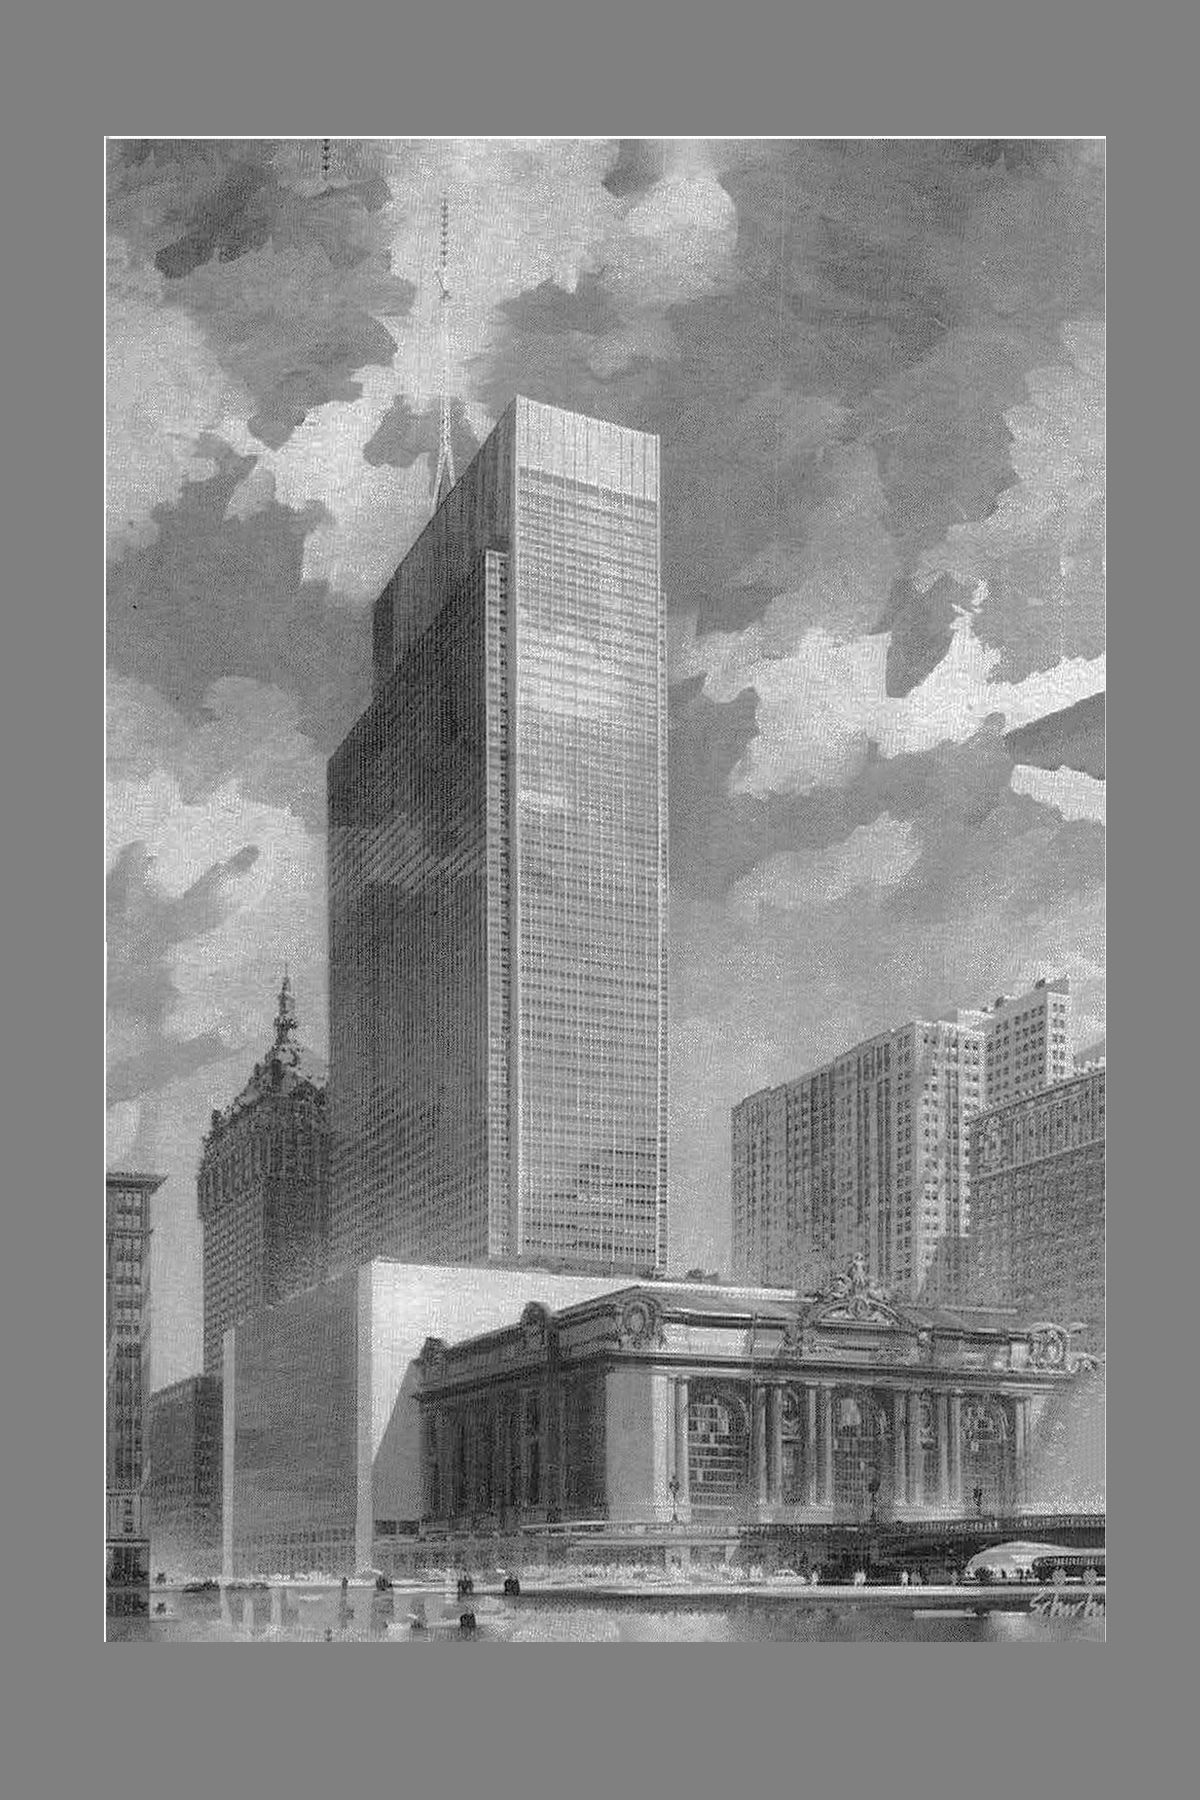 While many proposed tearing down Grand Central, this 1955 concept by Emery Roth and Sons would preserve the Beaux Art building (Architectural Forum, 1955).